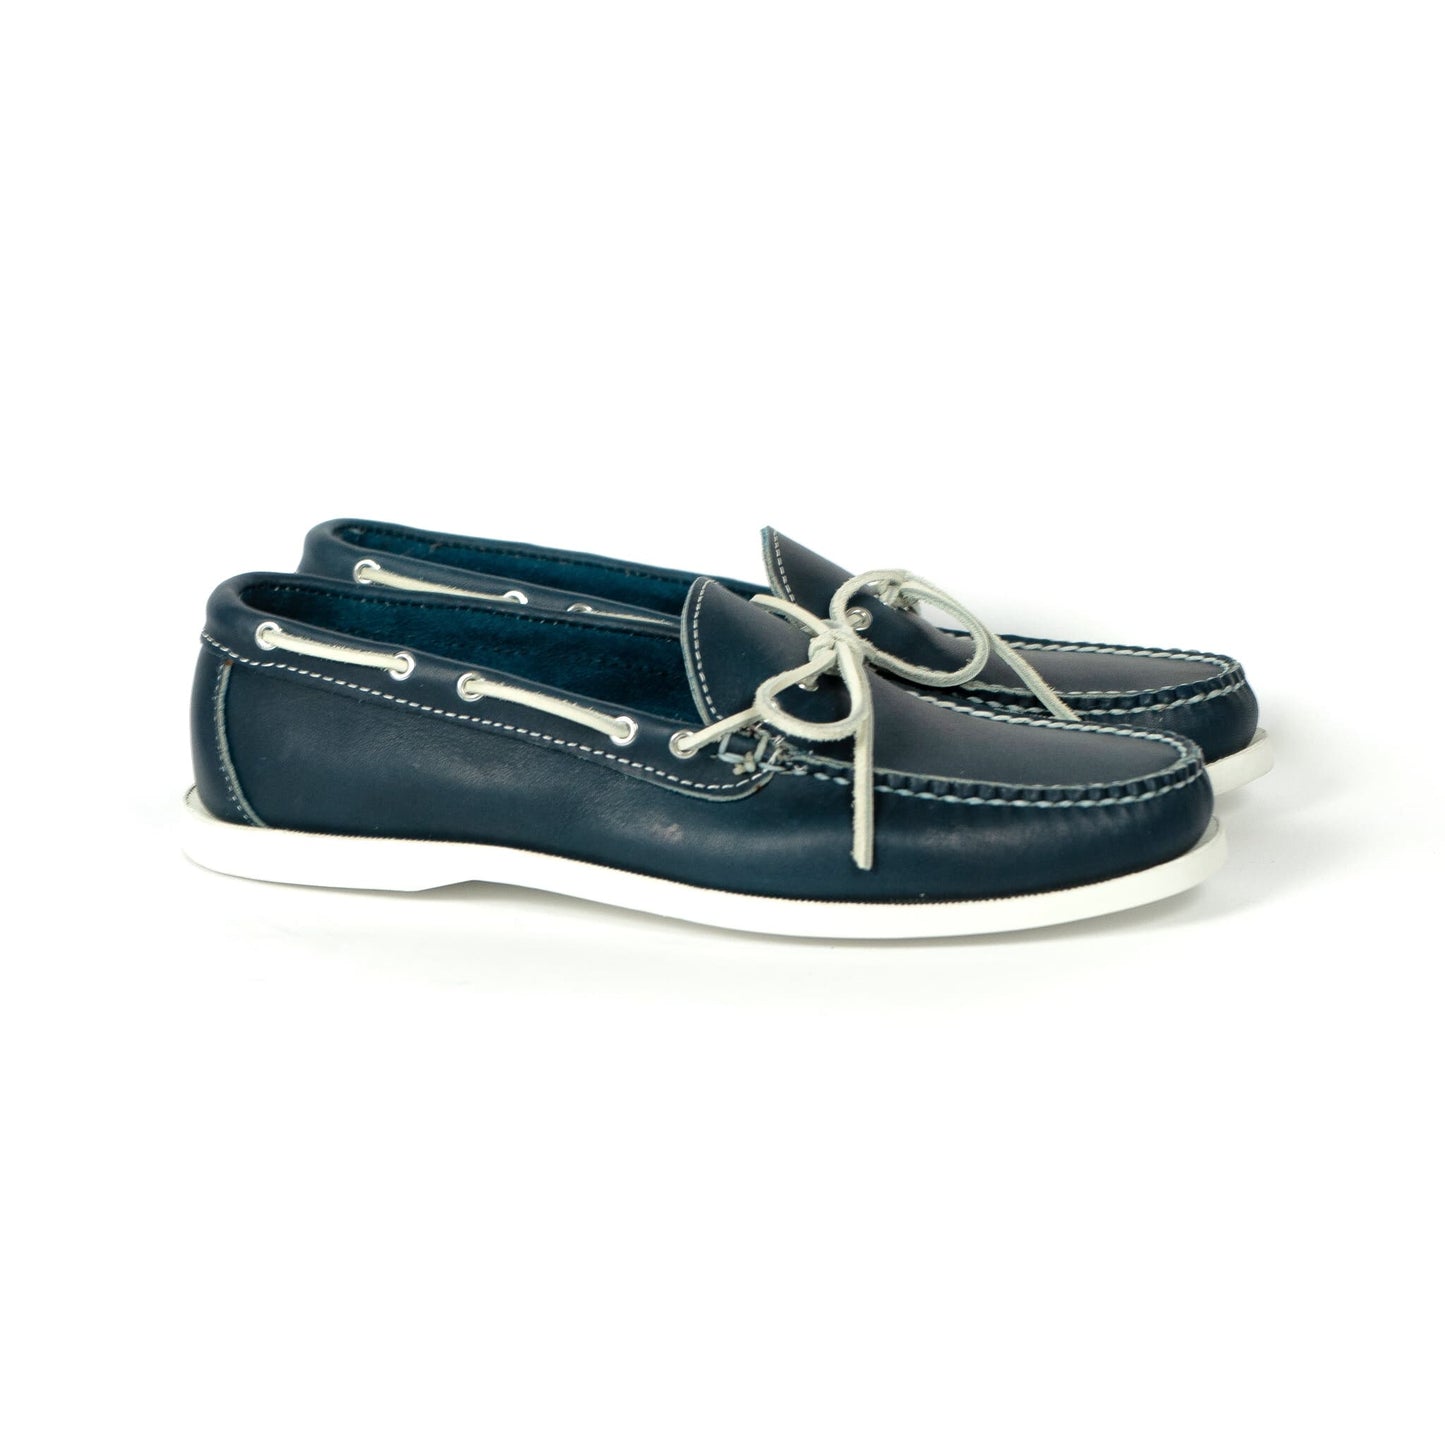 Dexter USA Camp Moc - Navy Full Grain Leather - White Boat Sole